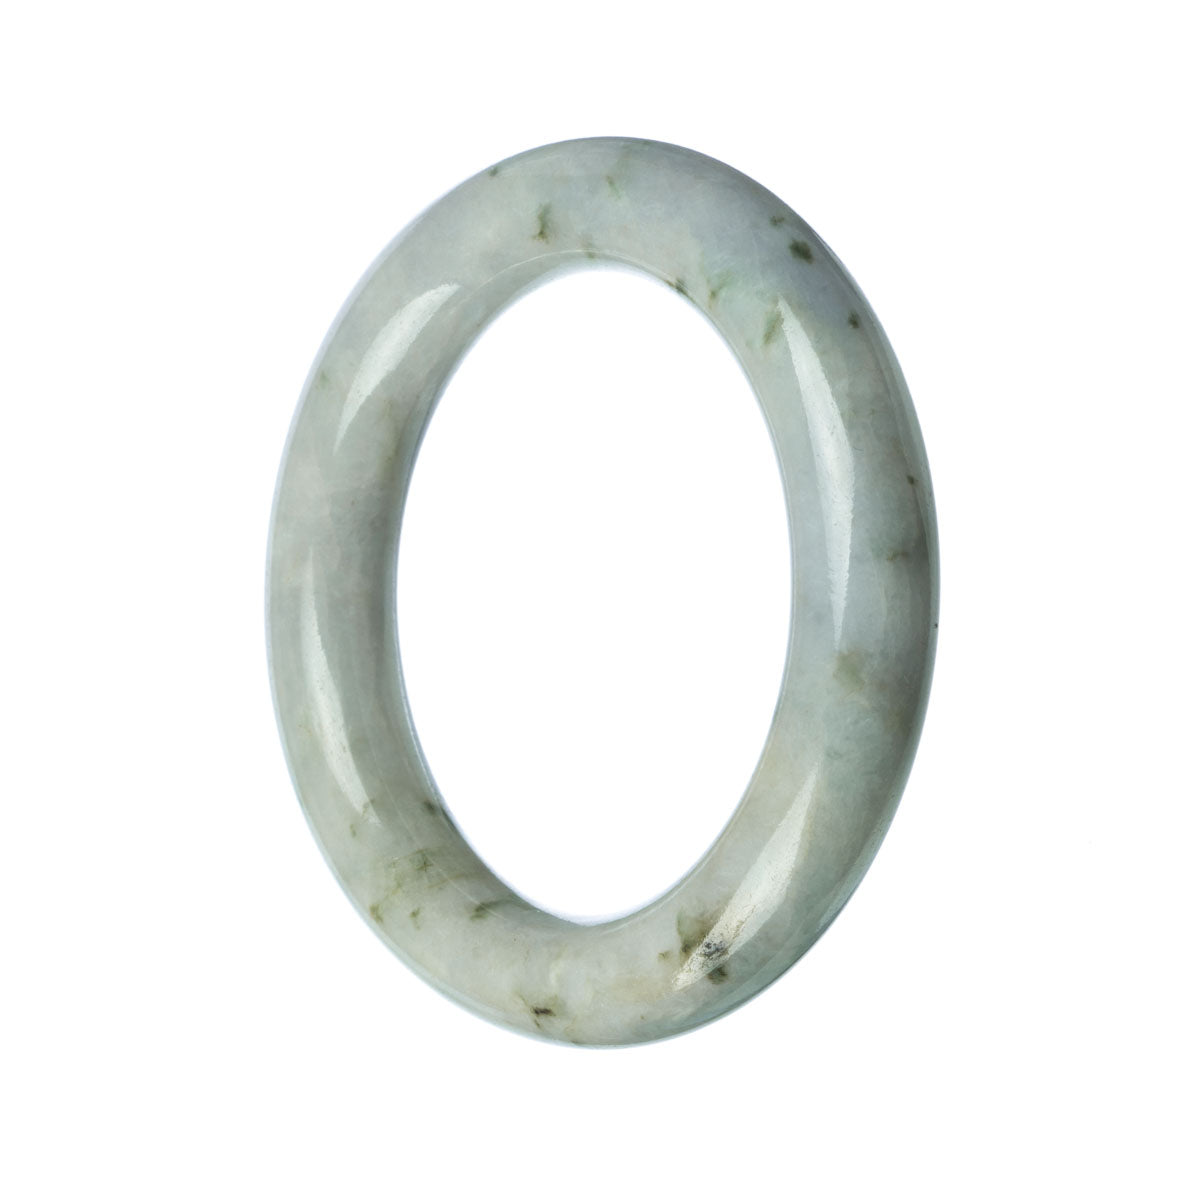 A stunning white jade bangle bracelet with a smooth round shape, made from authentic Grade A jadeite. The bracelet measures 57mm in diameter and is a beautiful addition to any jewelry collection.